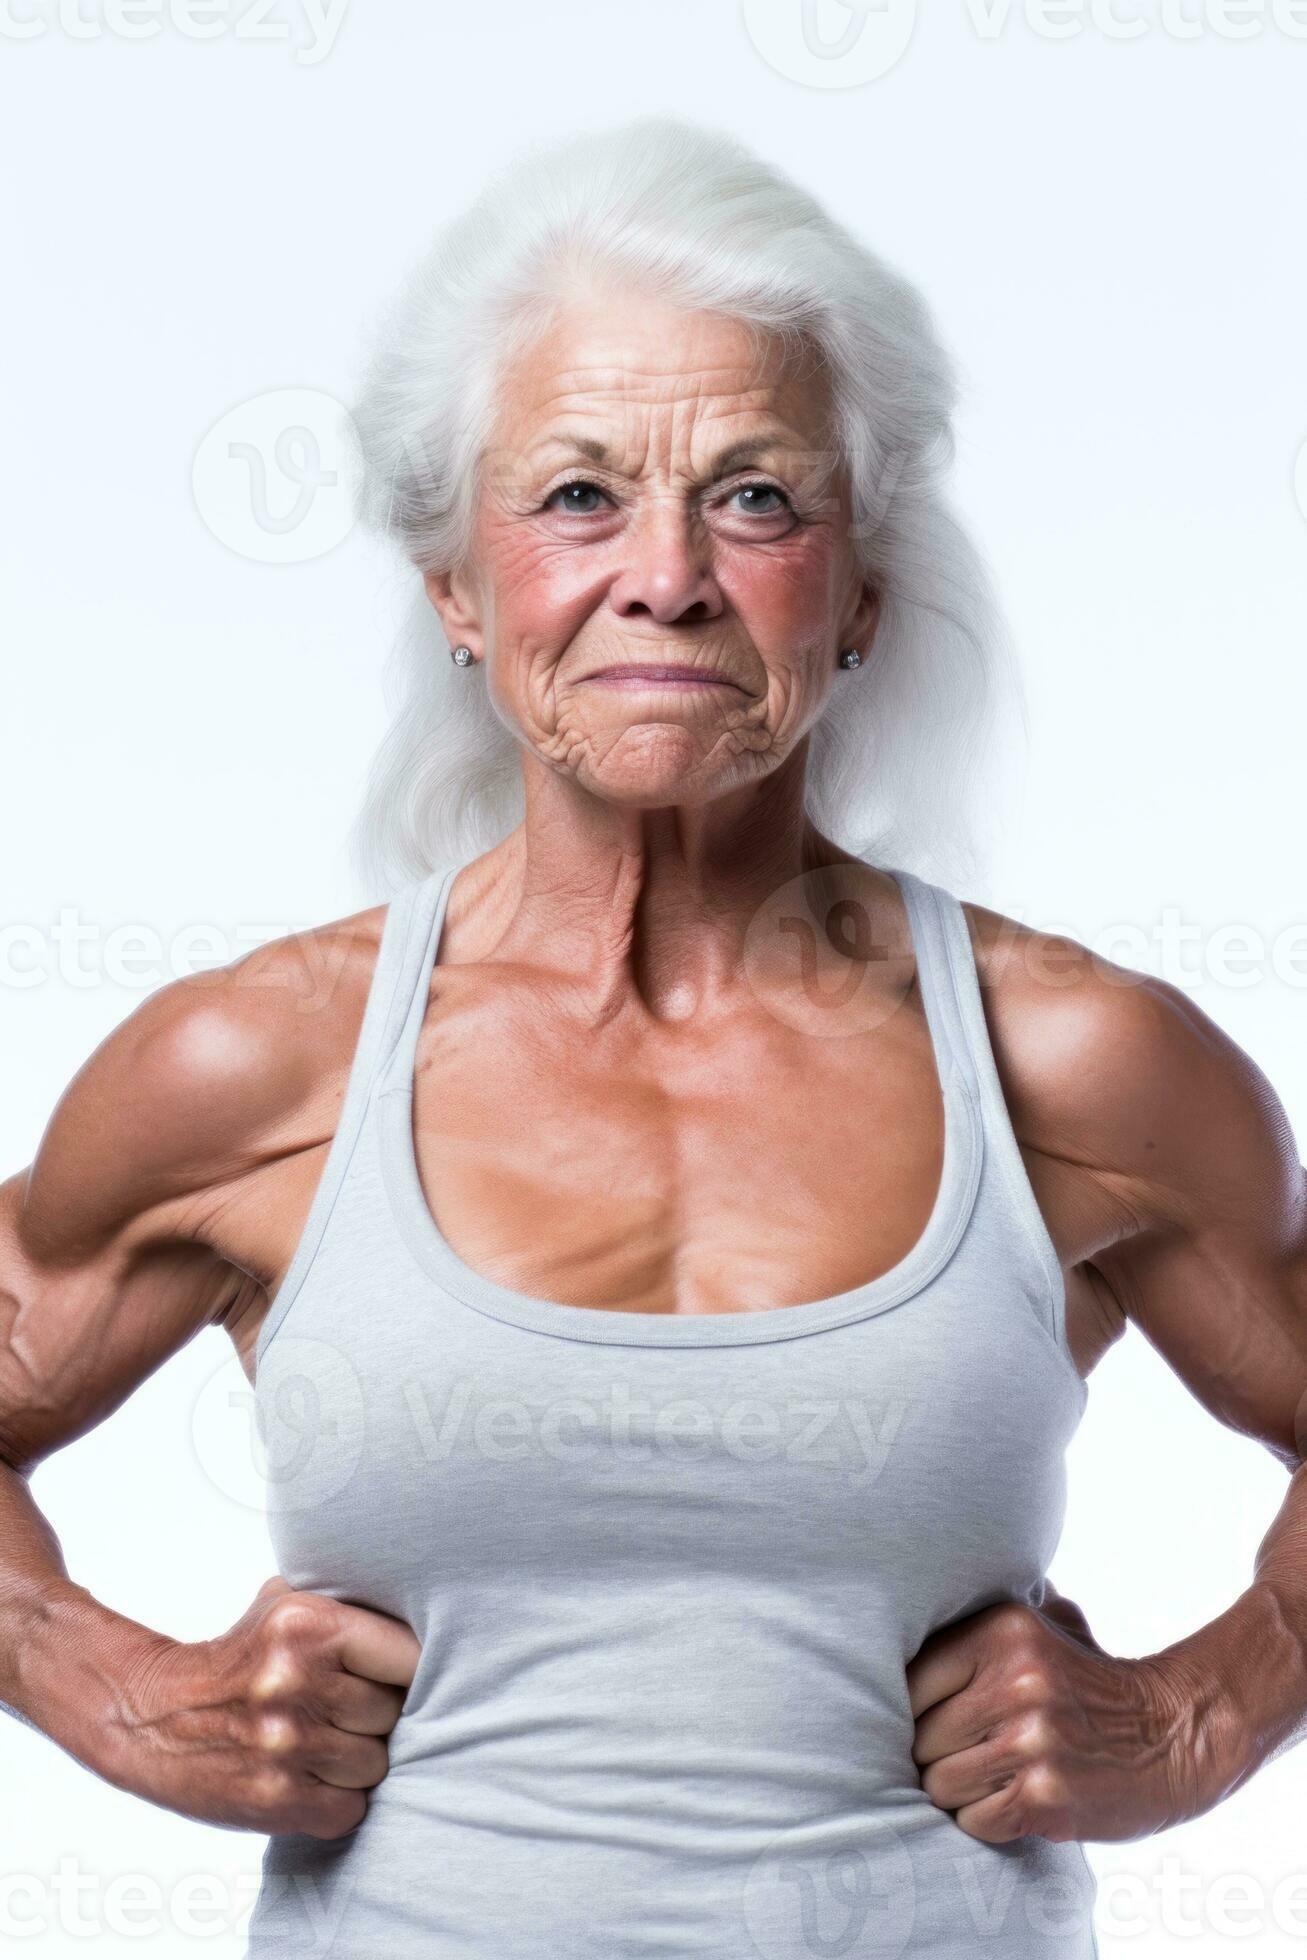 Muscular Elderly Woman Portrait Strong and Beautiful 29986256 Stock Photo  at Vecteezy